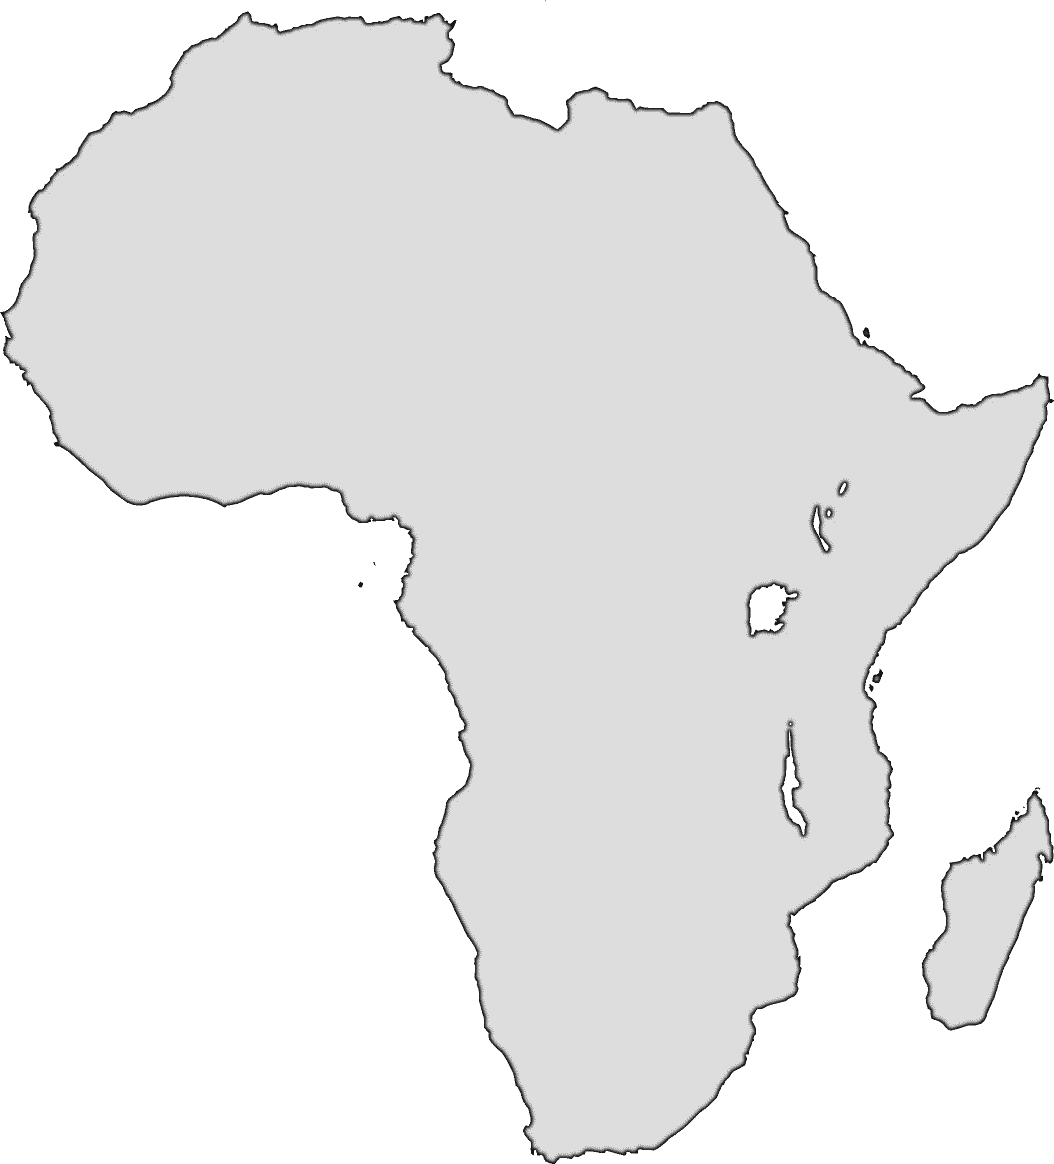 africa clipart map - photo #21